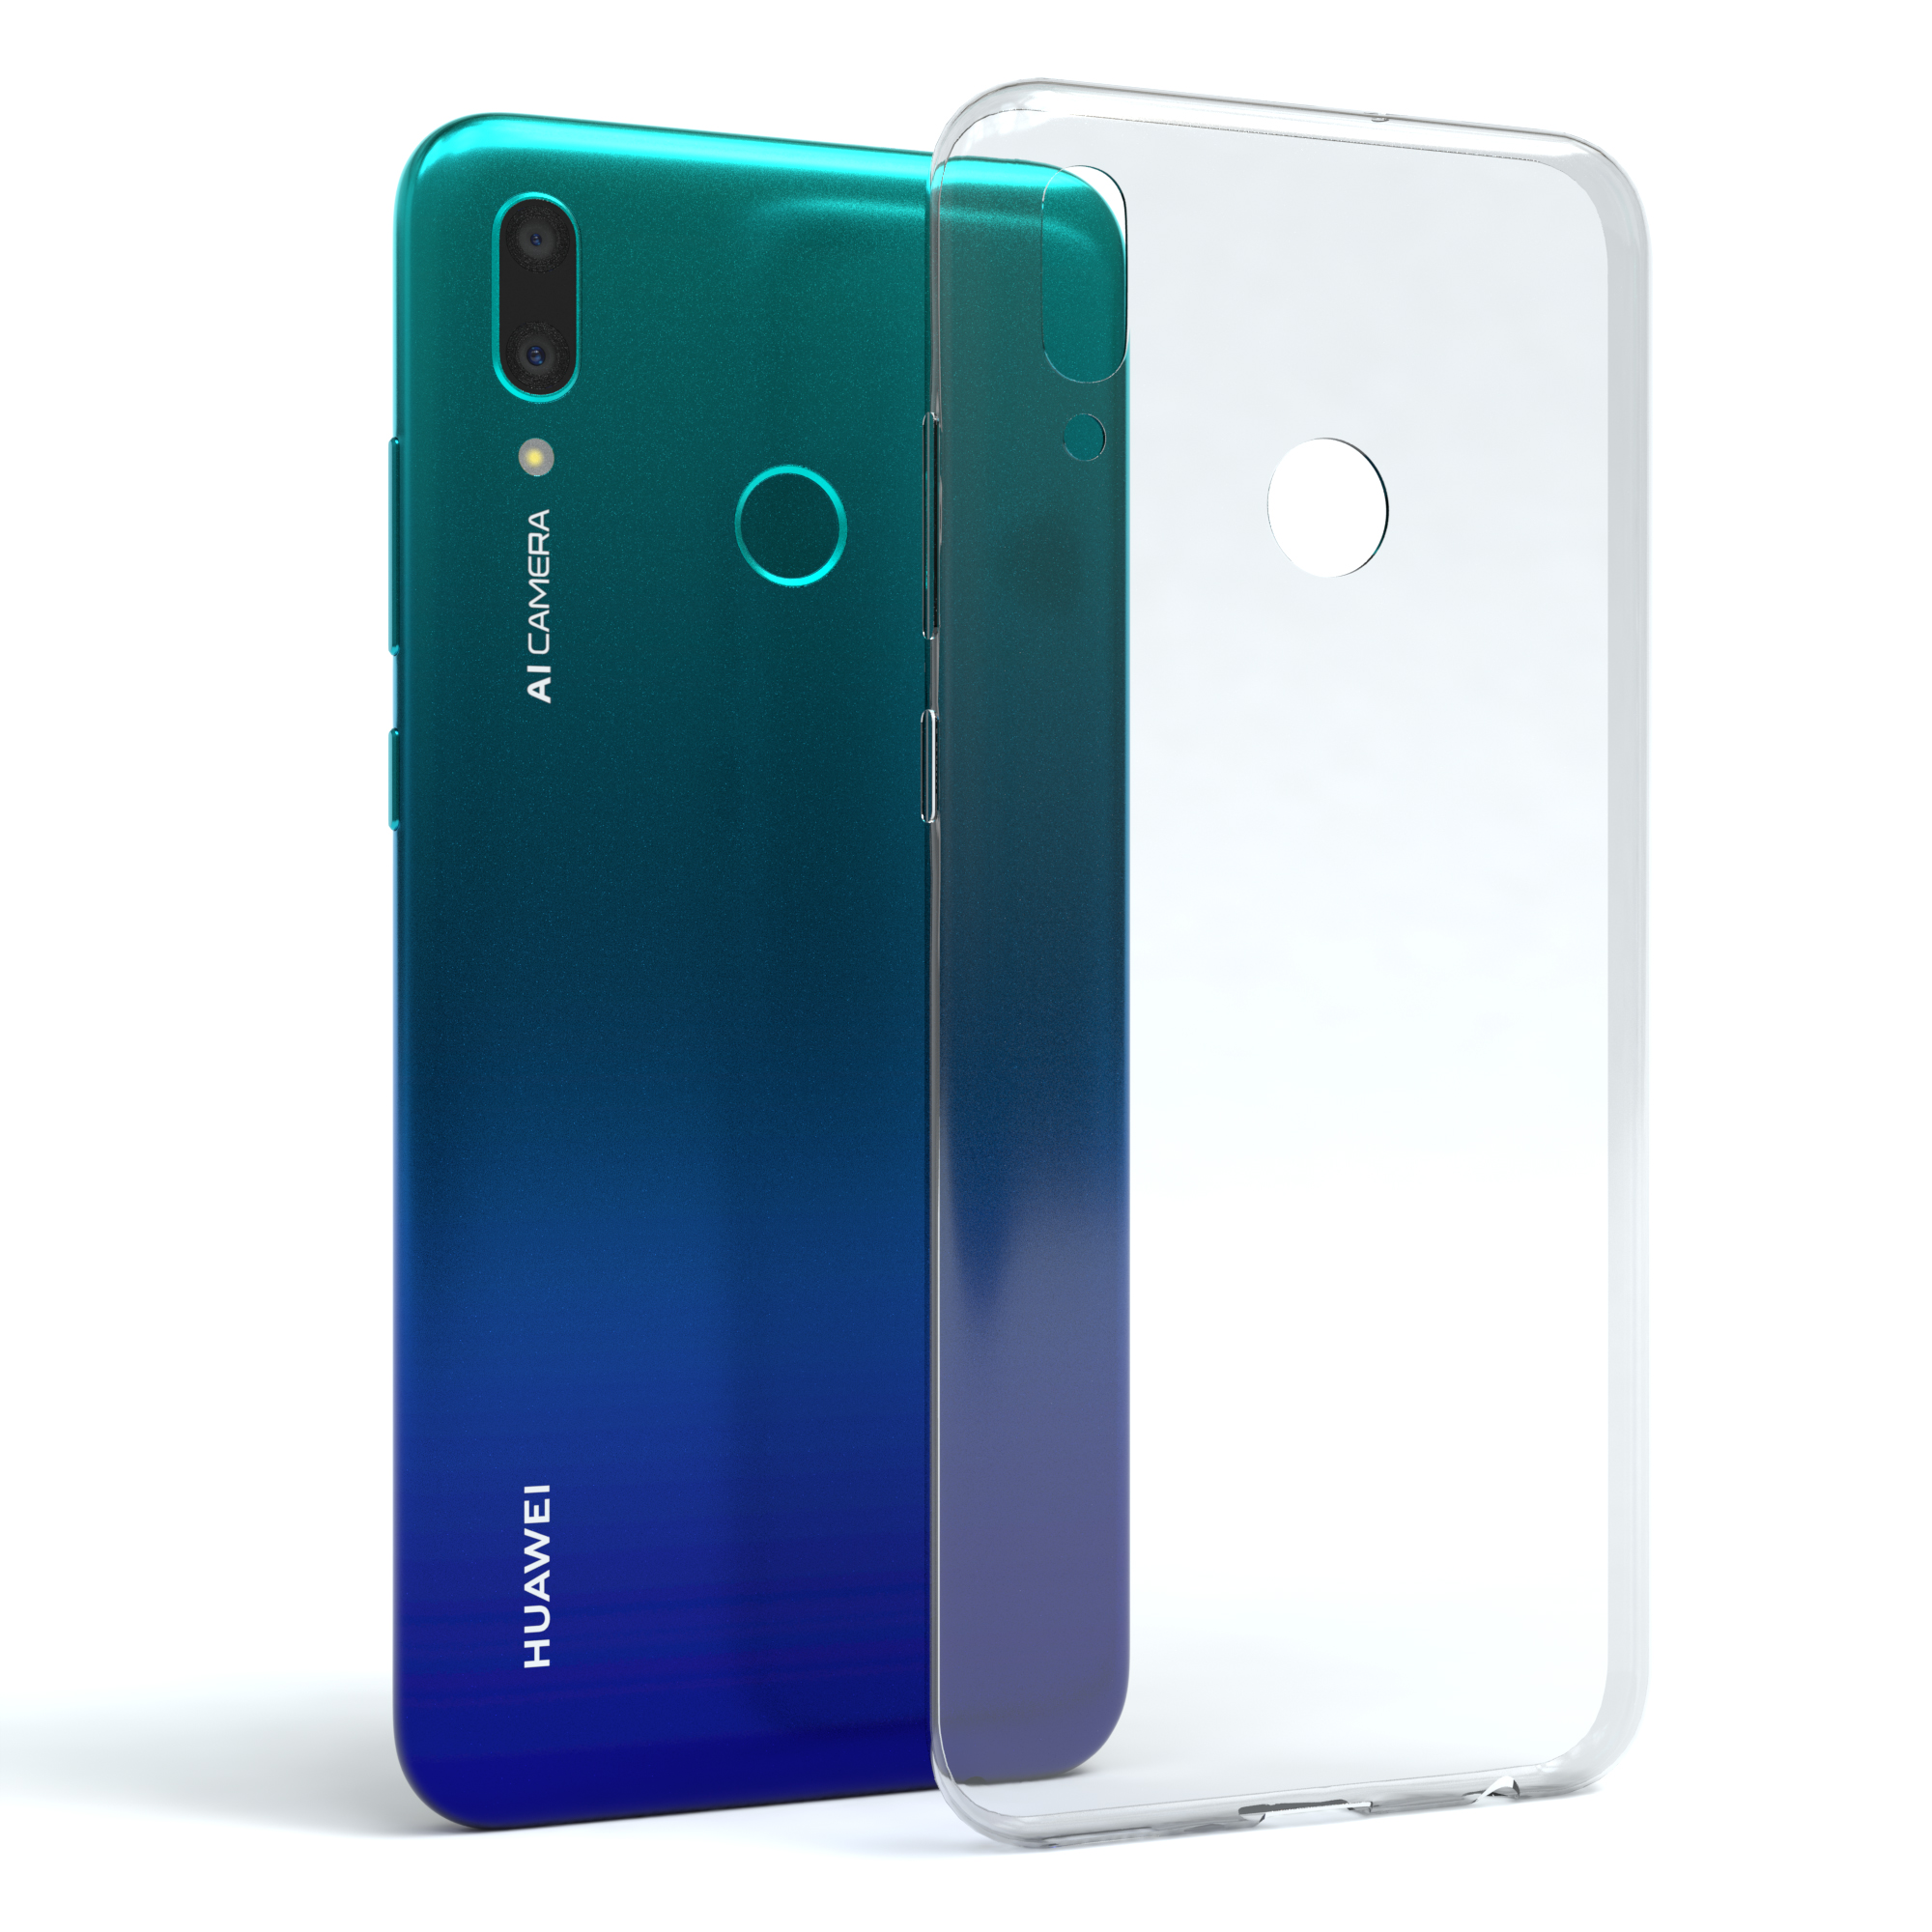 EAZY CASE Slimcover Clear, Backcover, P Smart Huawei, Durchsichtig (2019)